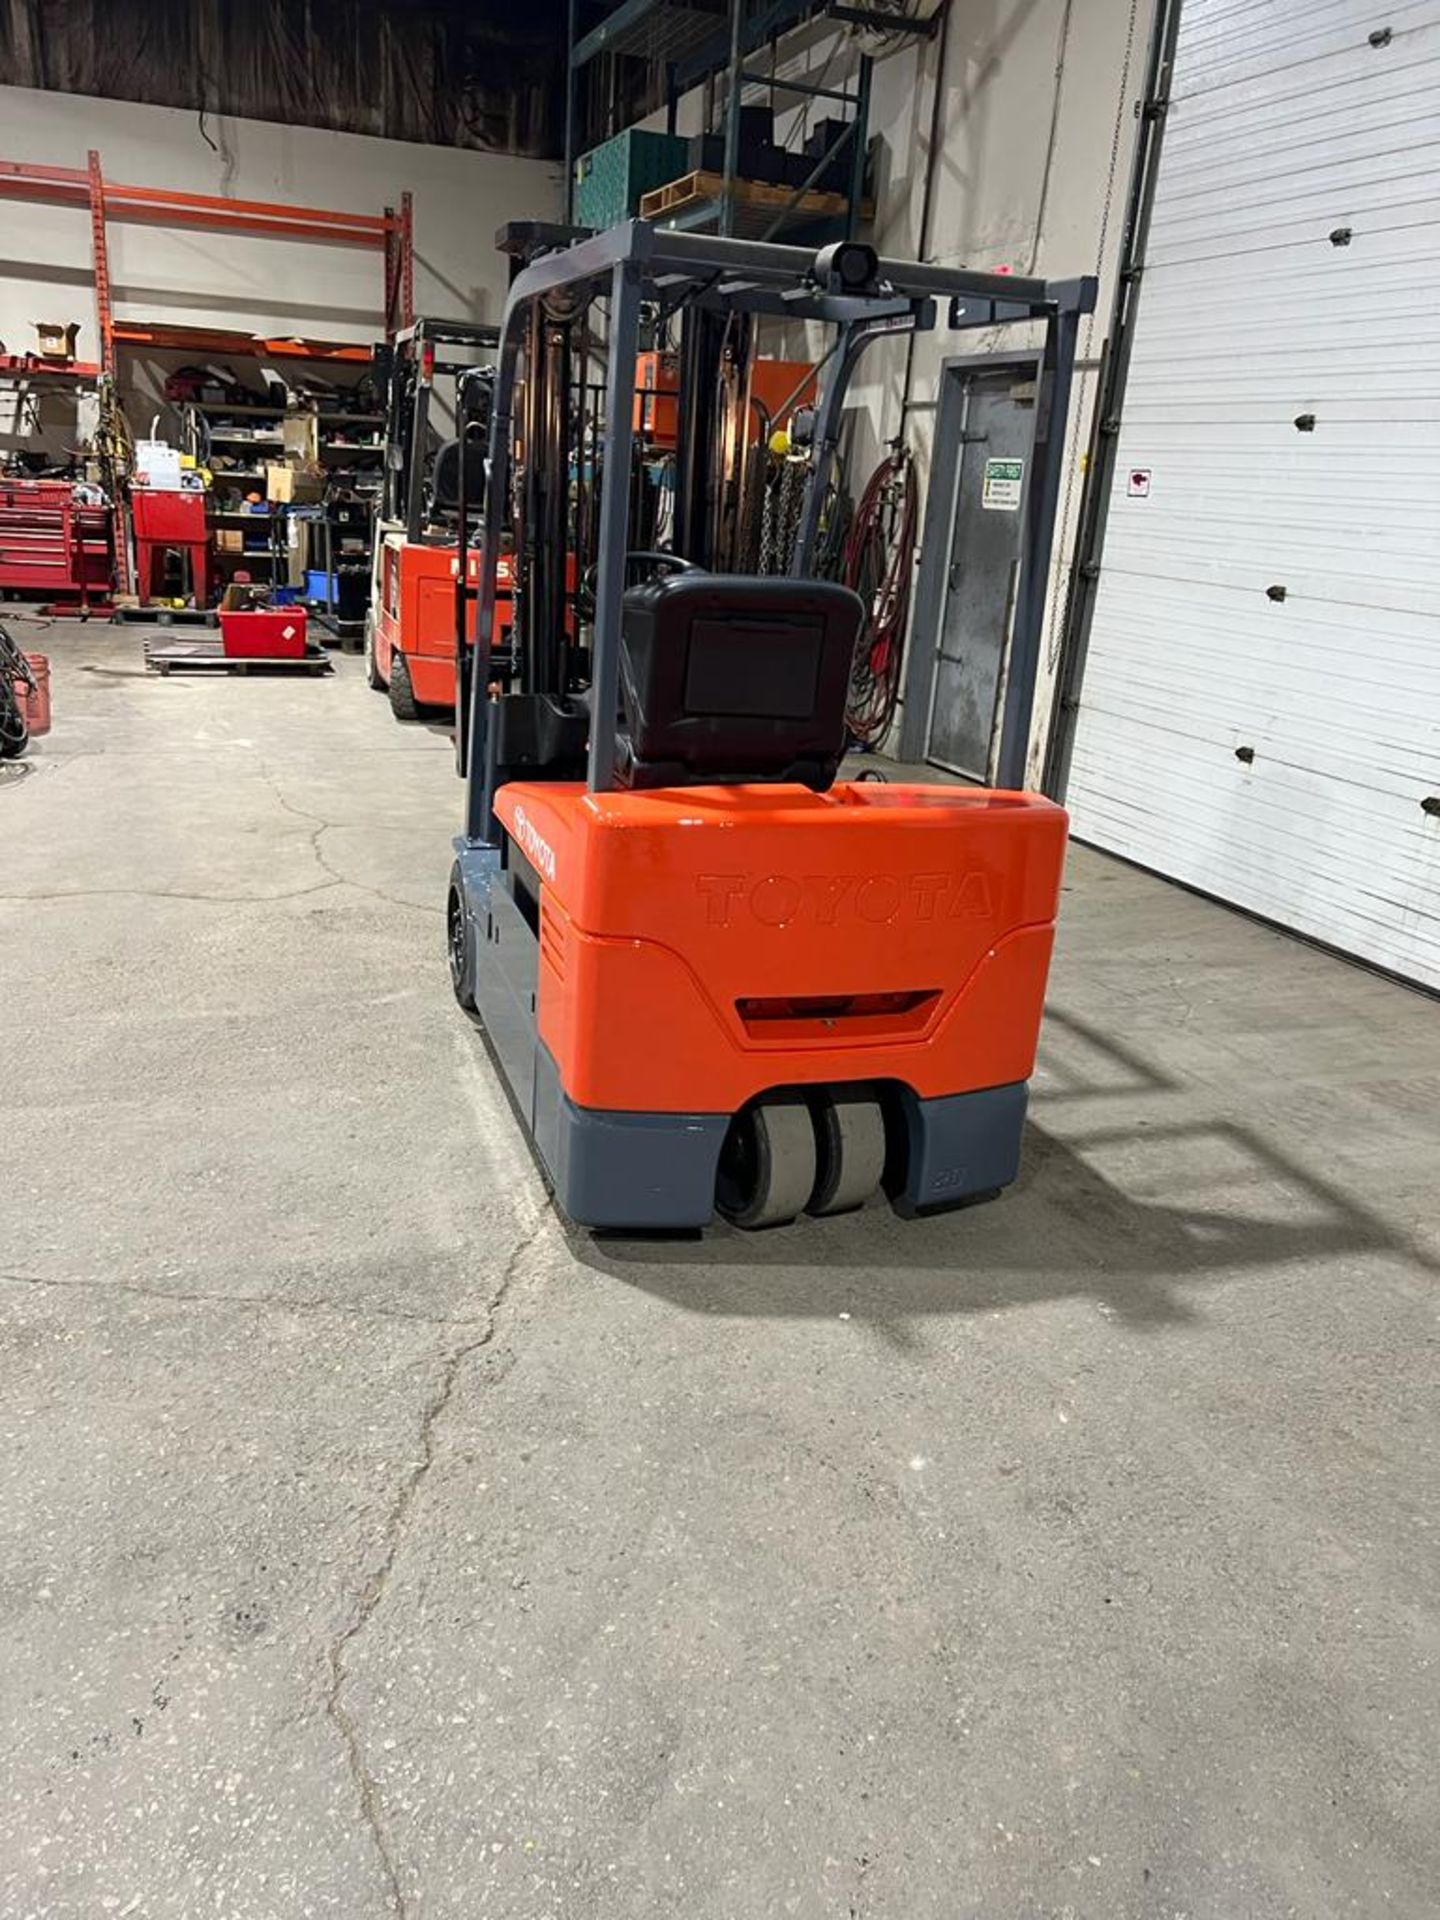 Toyota 4,000lbs Capacity Forklift Electric 36V 3-Wheel with Sideshift 3-stage mast - FREE CUSTOMS - Image 3 of 4